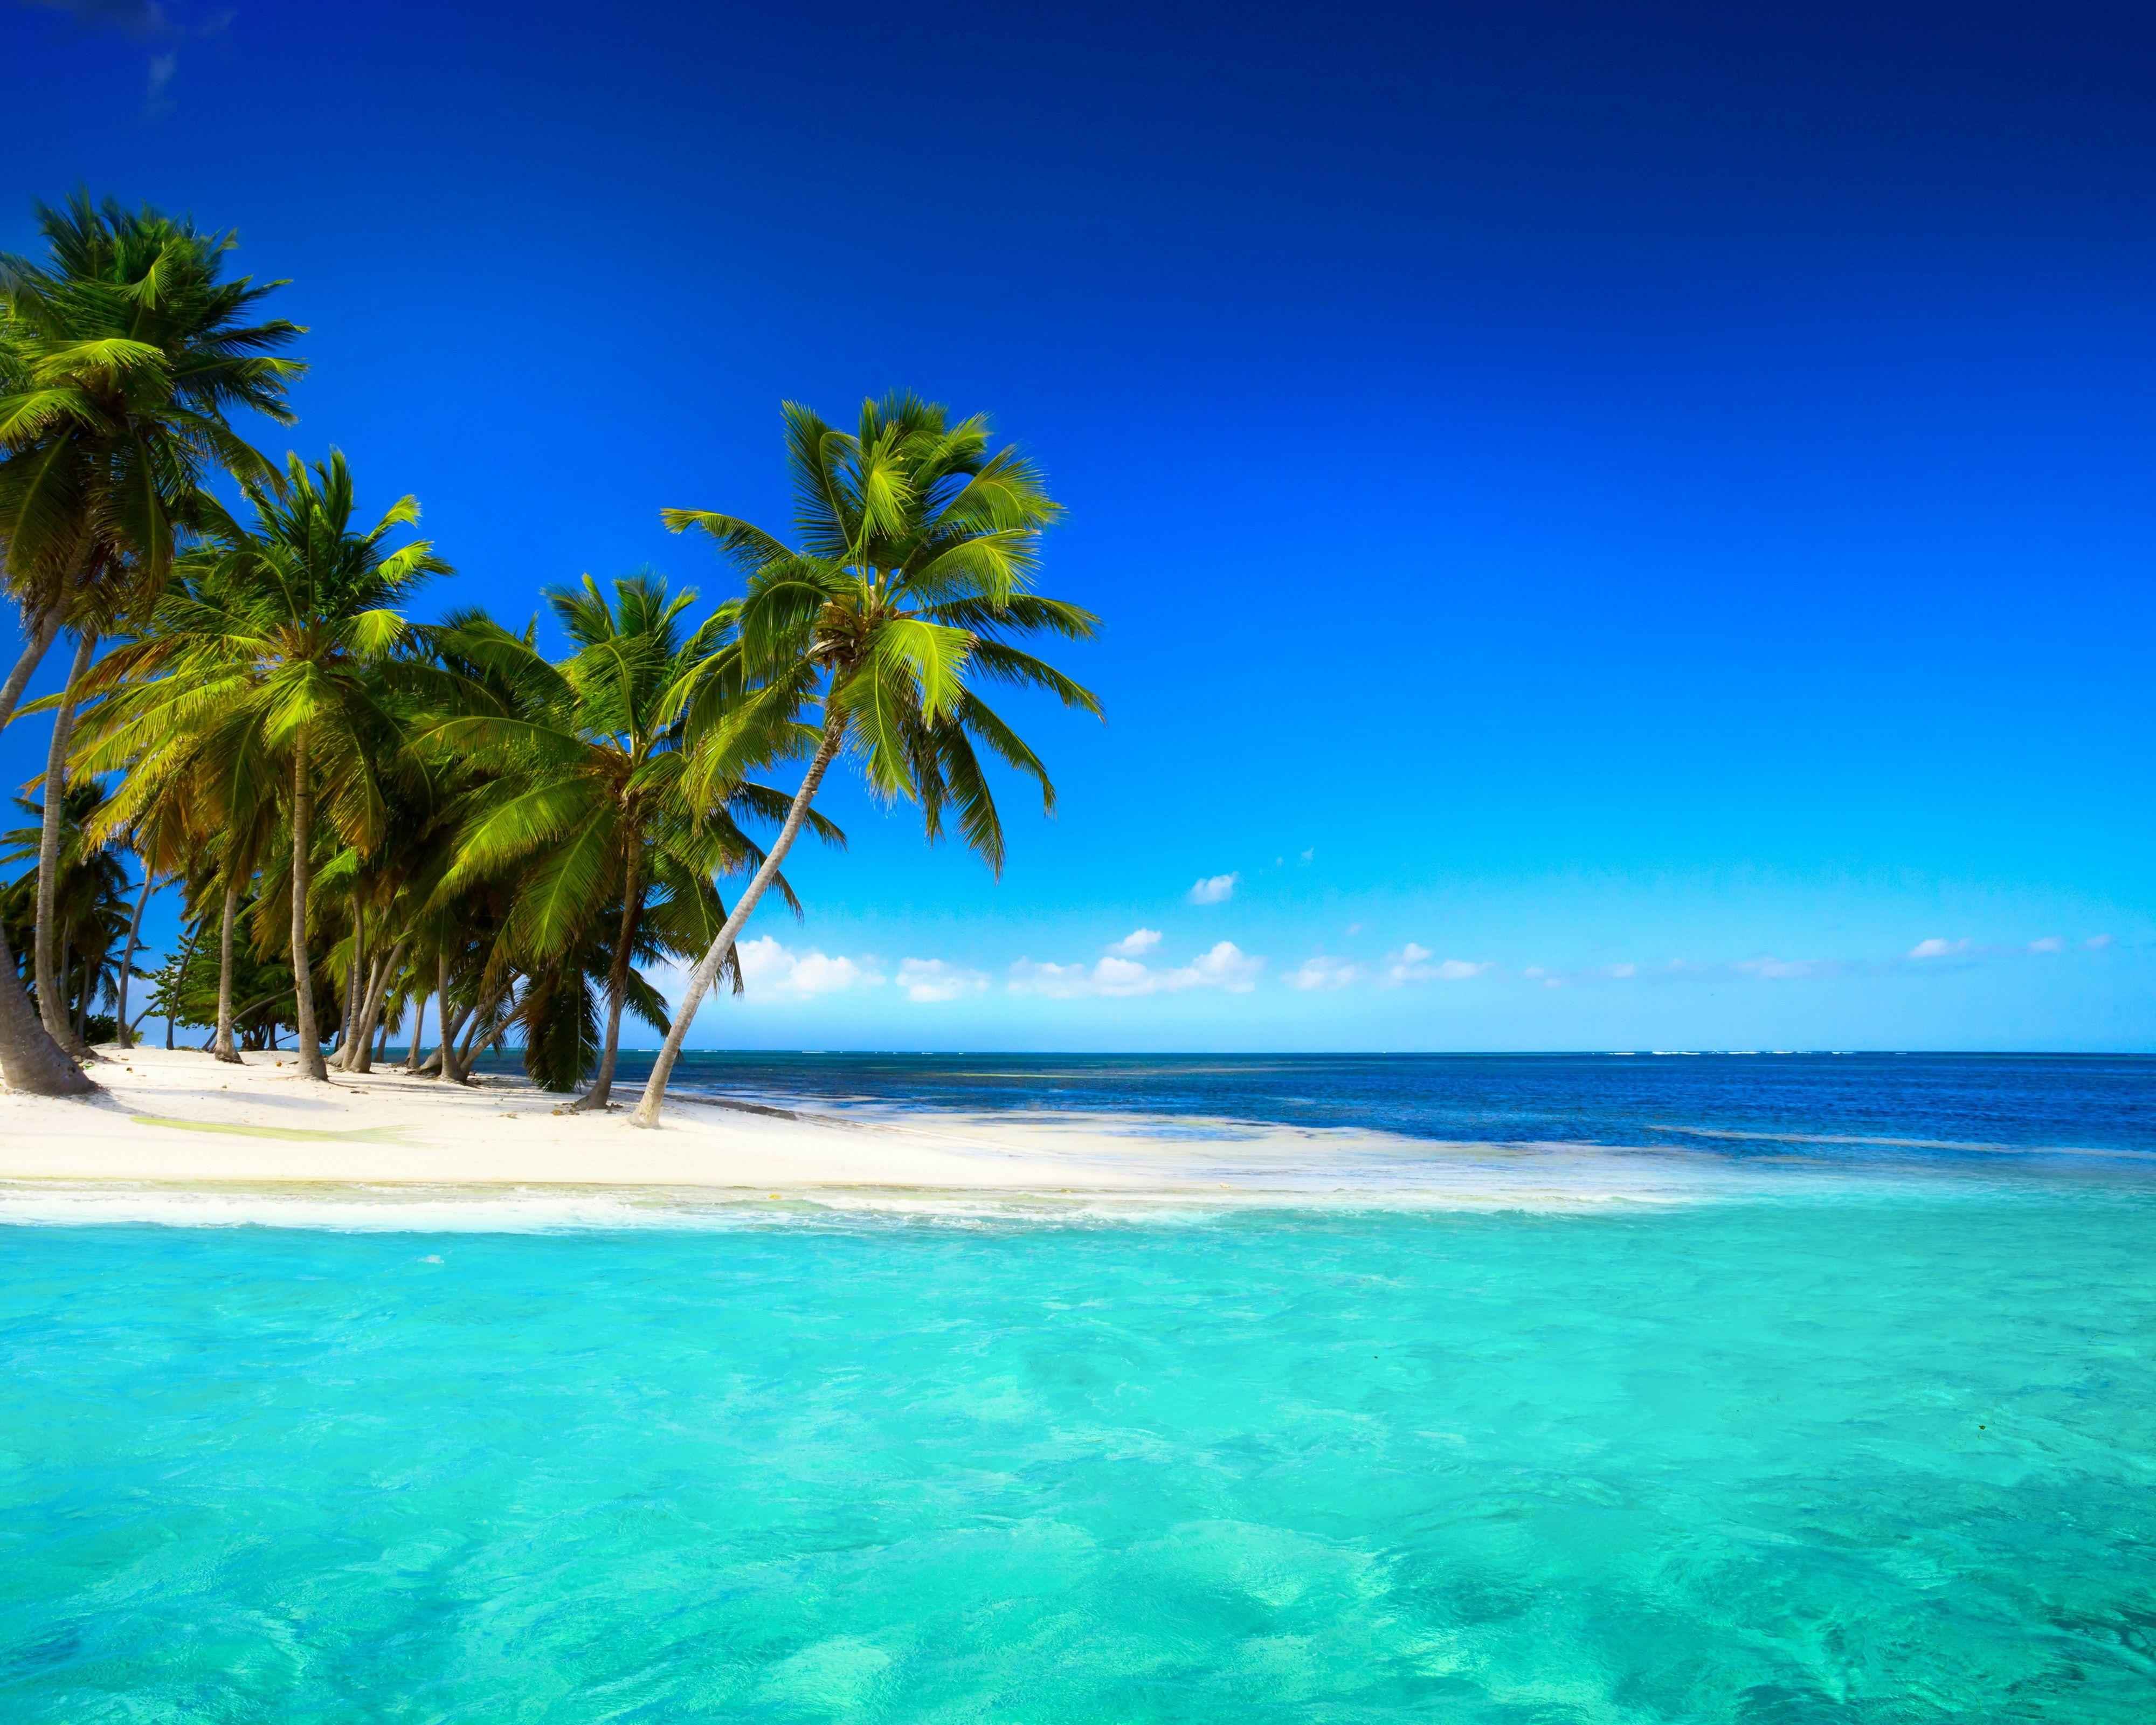 Tropical Island Paradise Wallpapers - Top Free Tropical Island Paradise